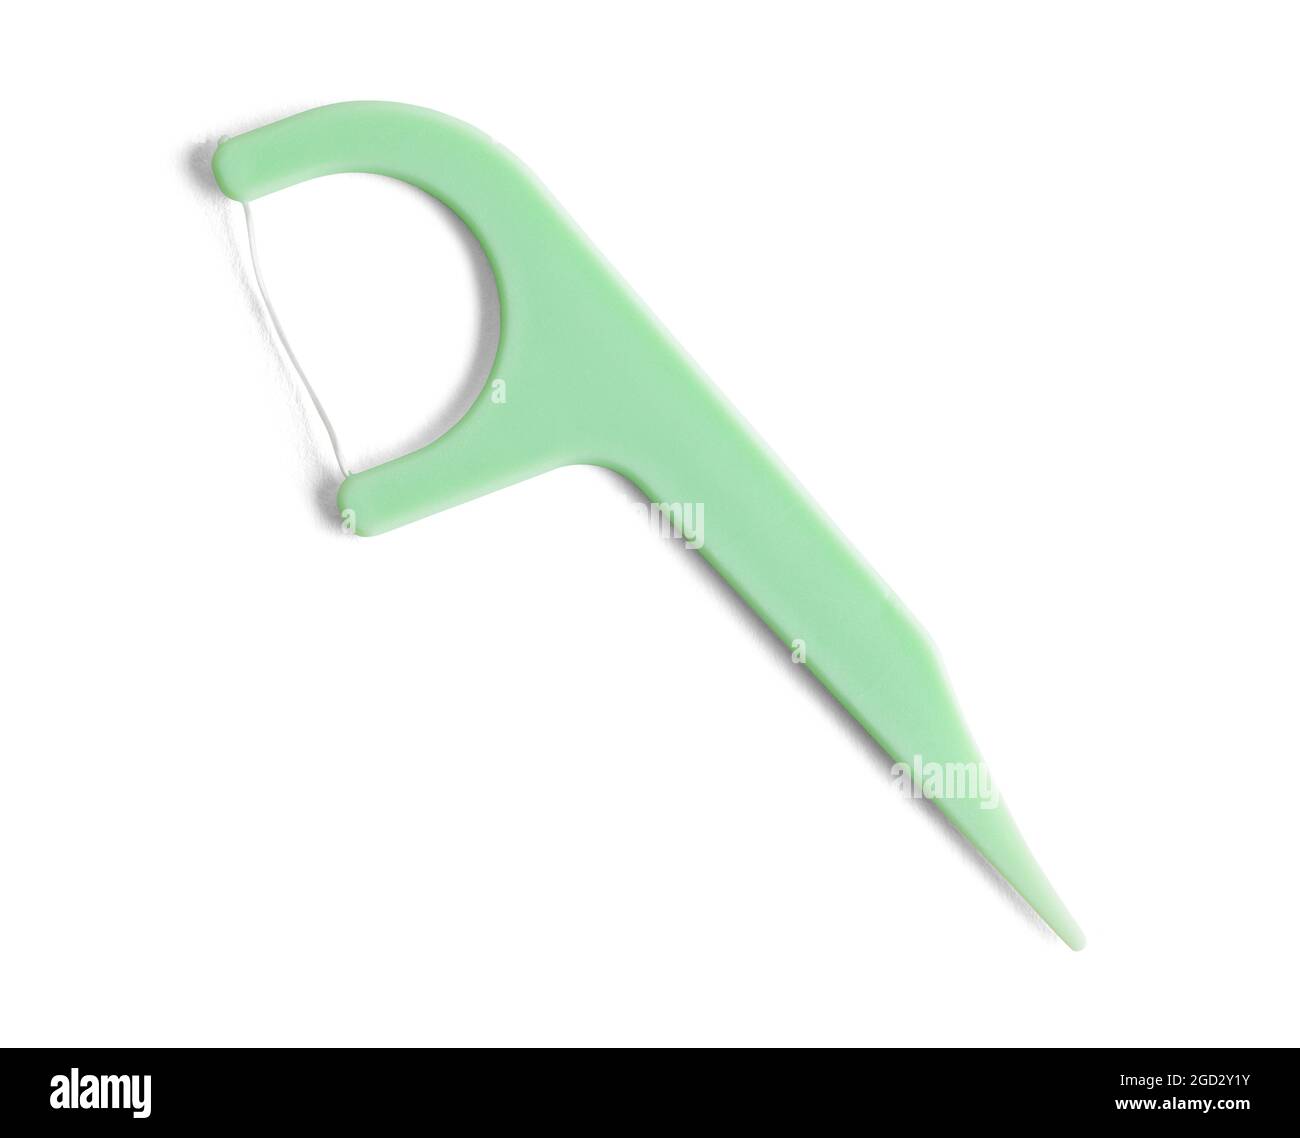 Green Plastic Dental Floss Pick Cut Out On White. Stock Photo